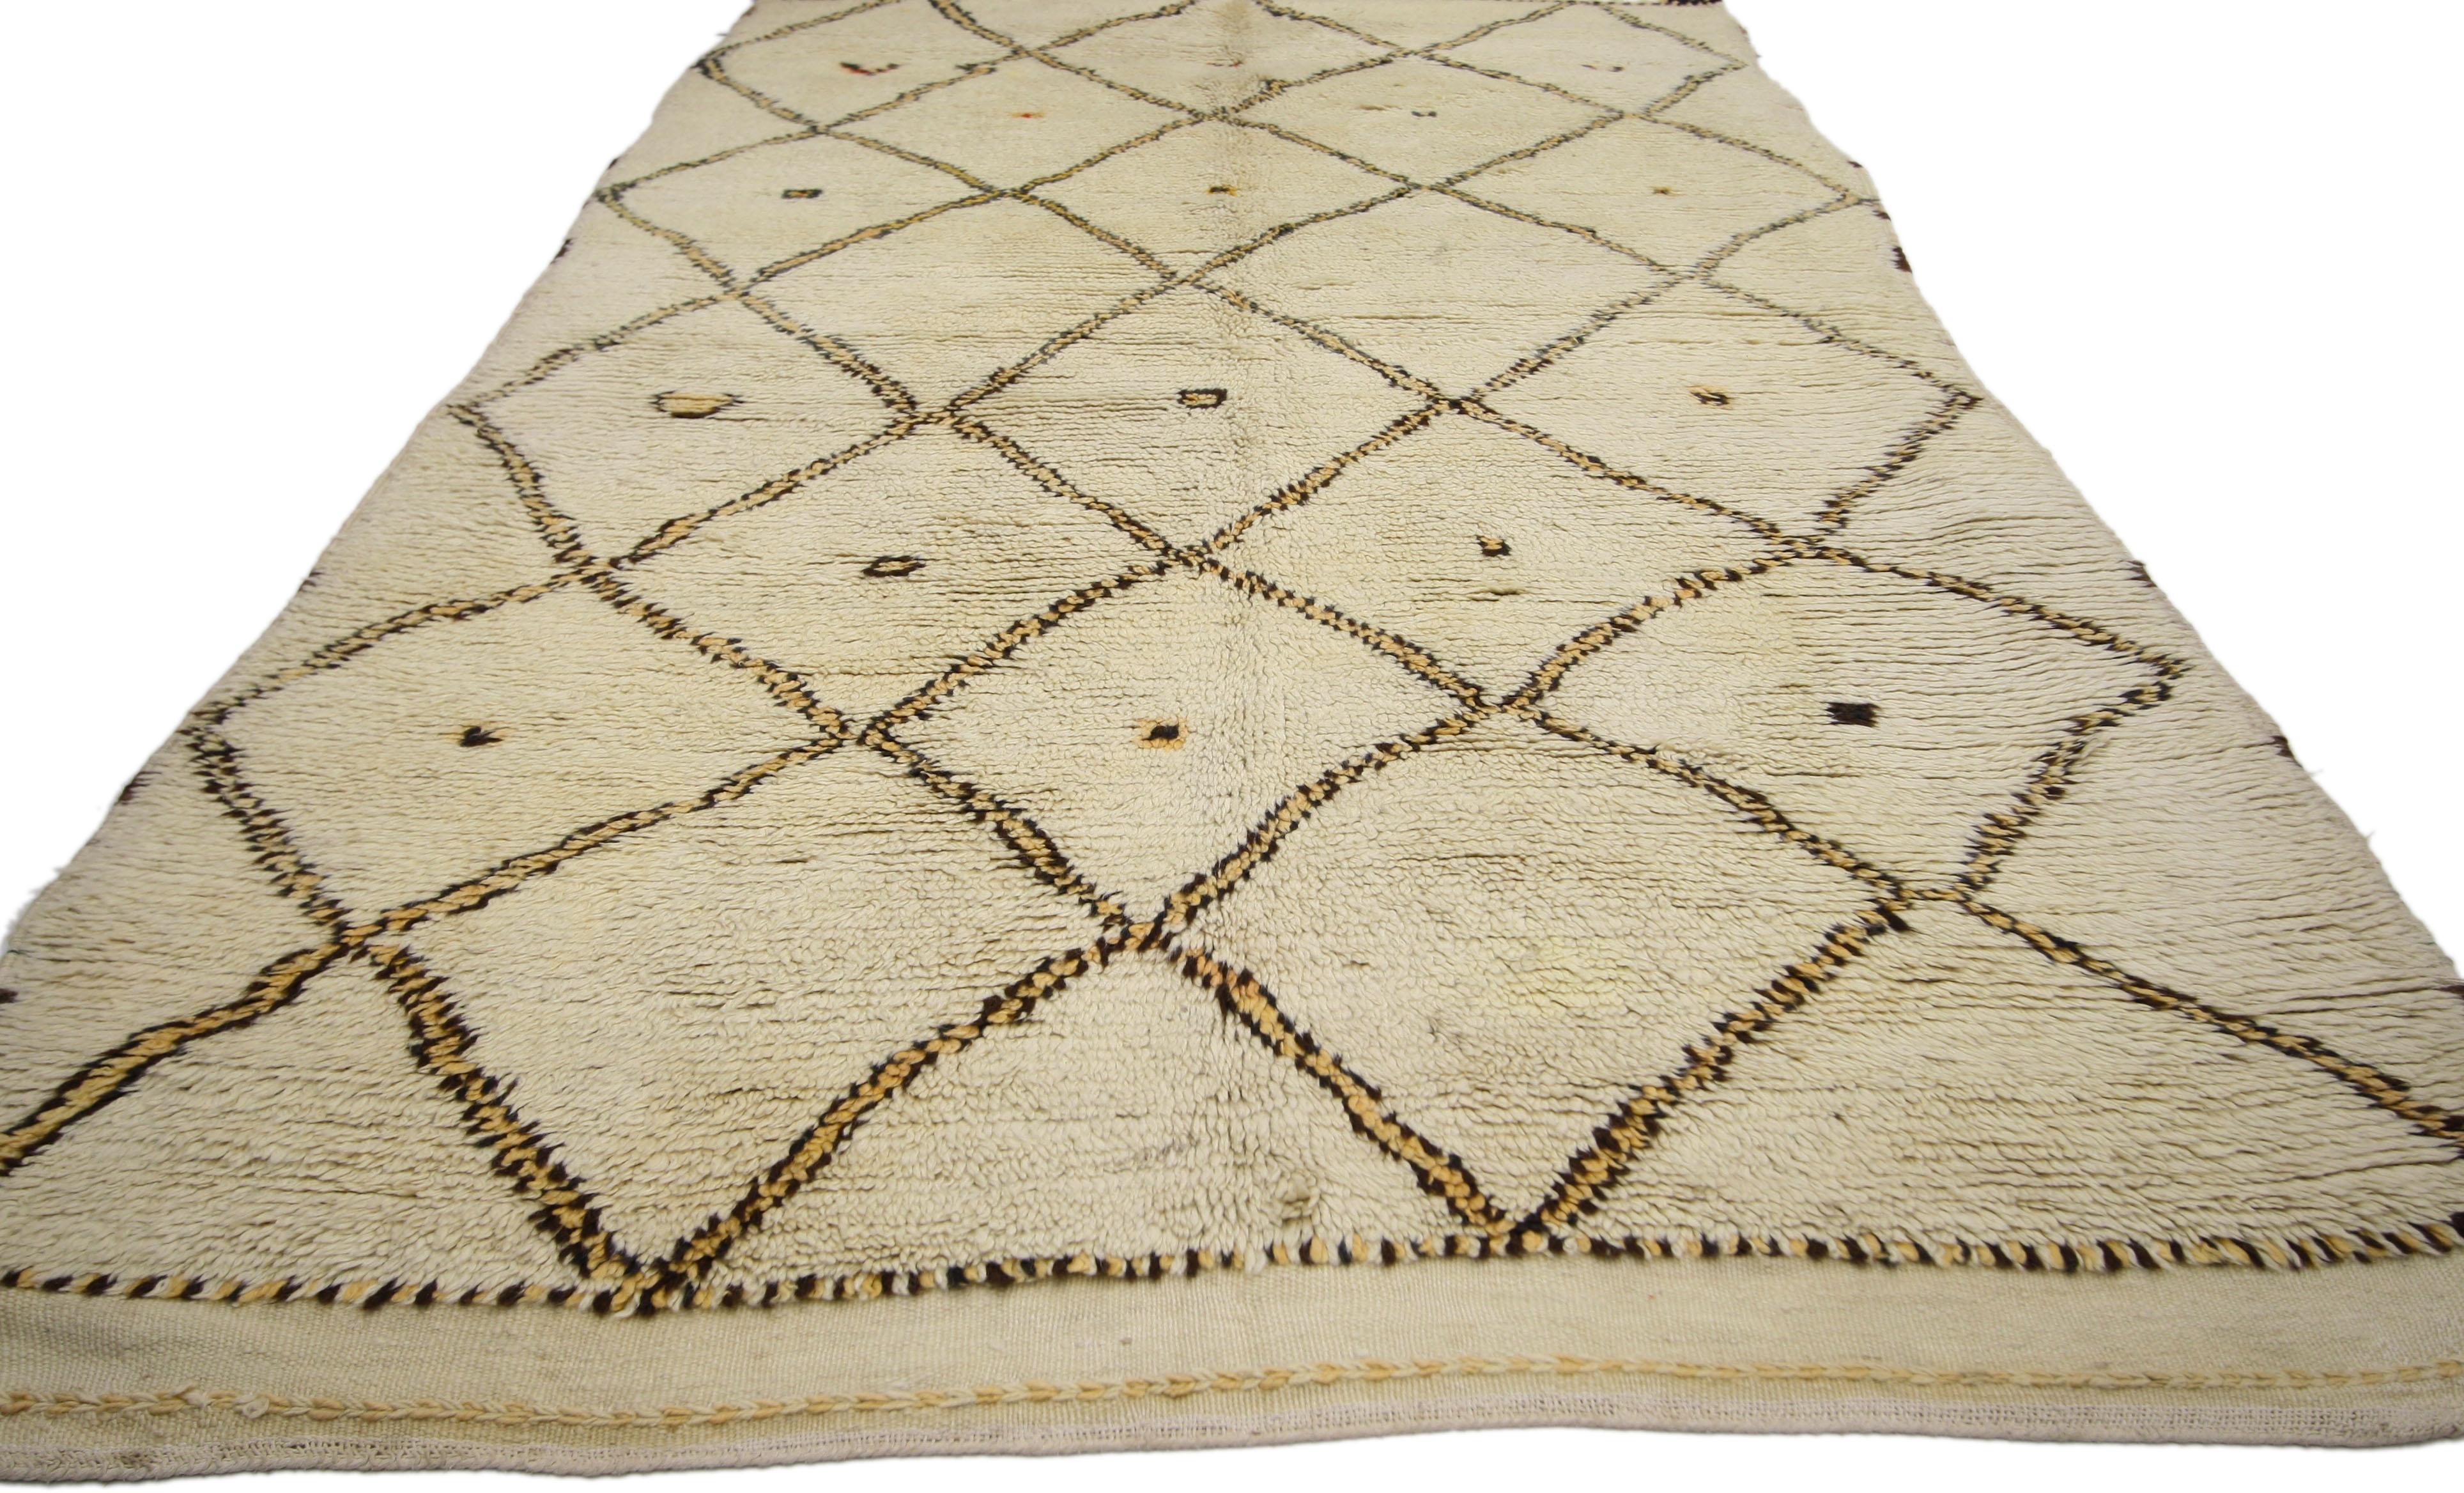 74468, vintage Moroccan Azilal rug with Minimalist Design and Nordic style. This hand knotted wool vintage Moroccan Azilal rug features a lozenge trellis pattern on a neutral background. Bold, thick lines of espresso coffee and saffron colors form a